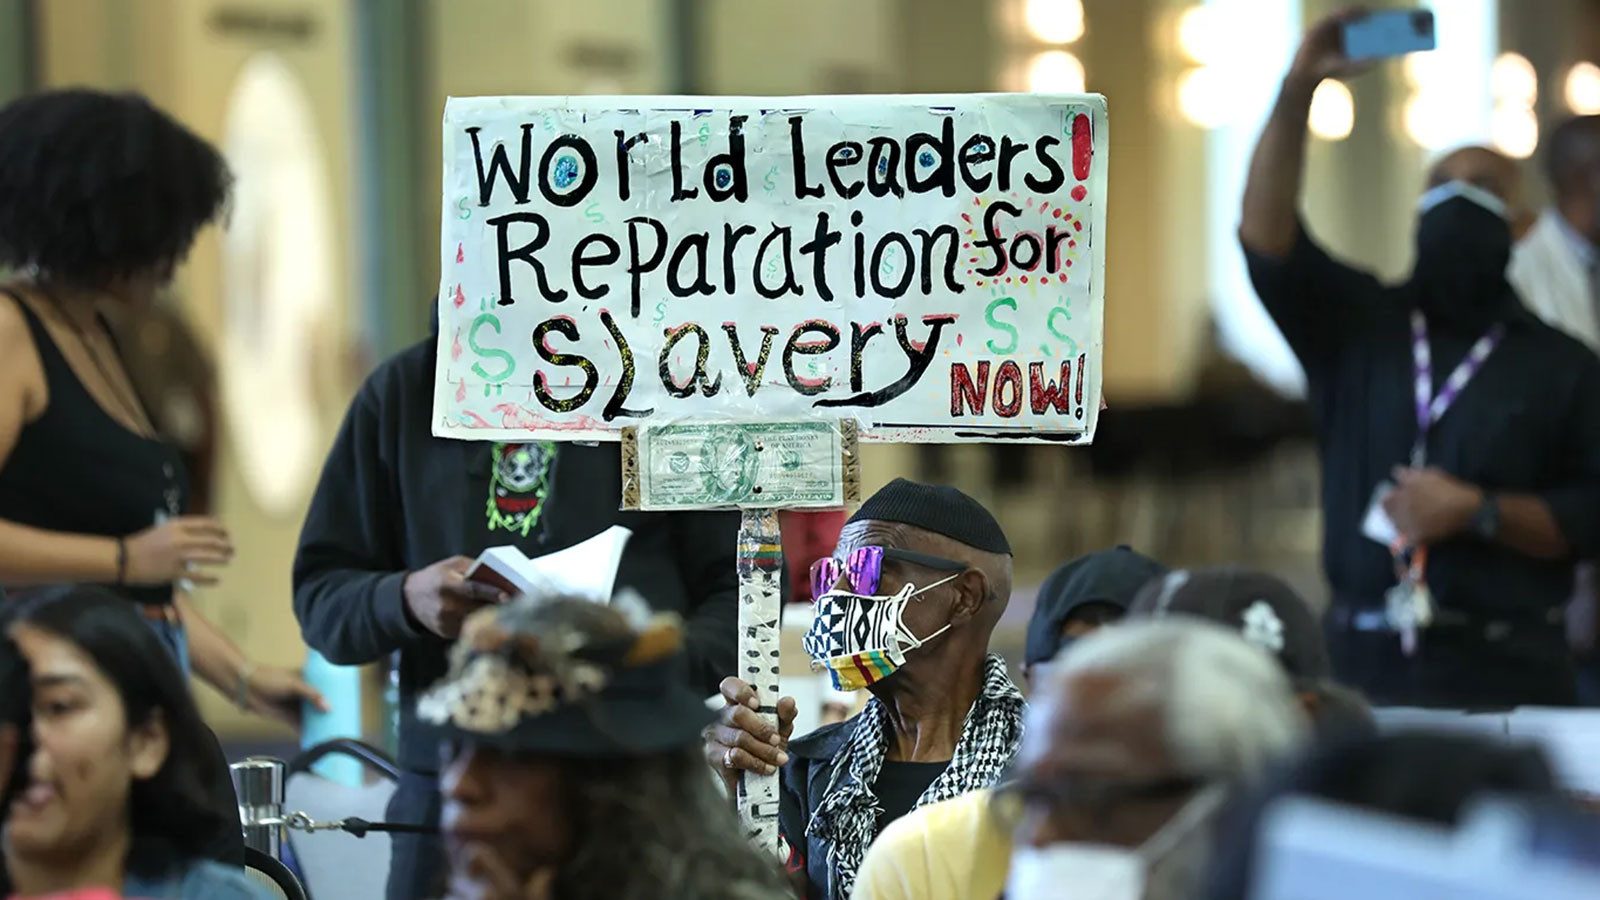 On the other side of reparations, a new world awaits